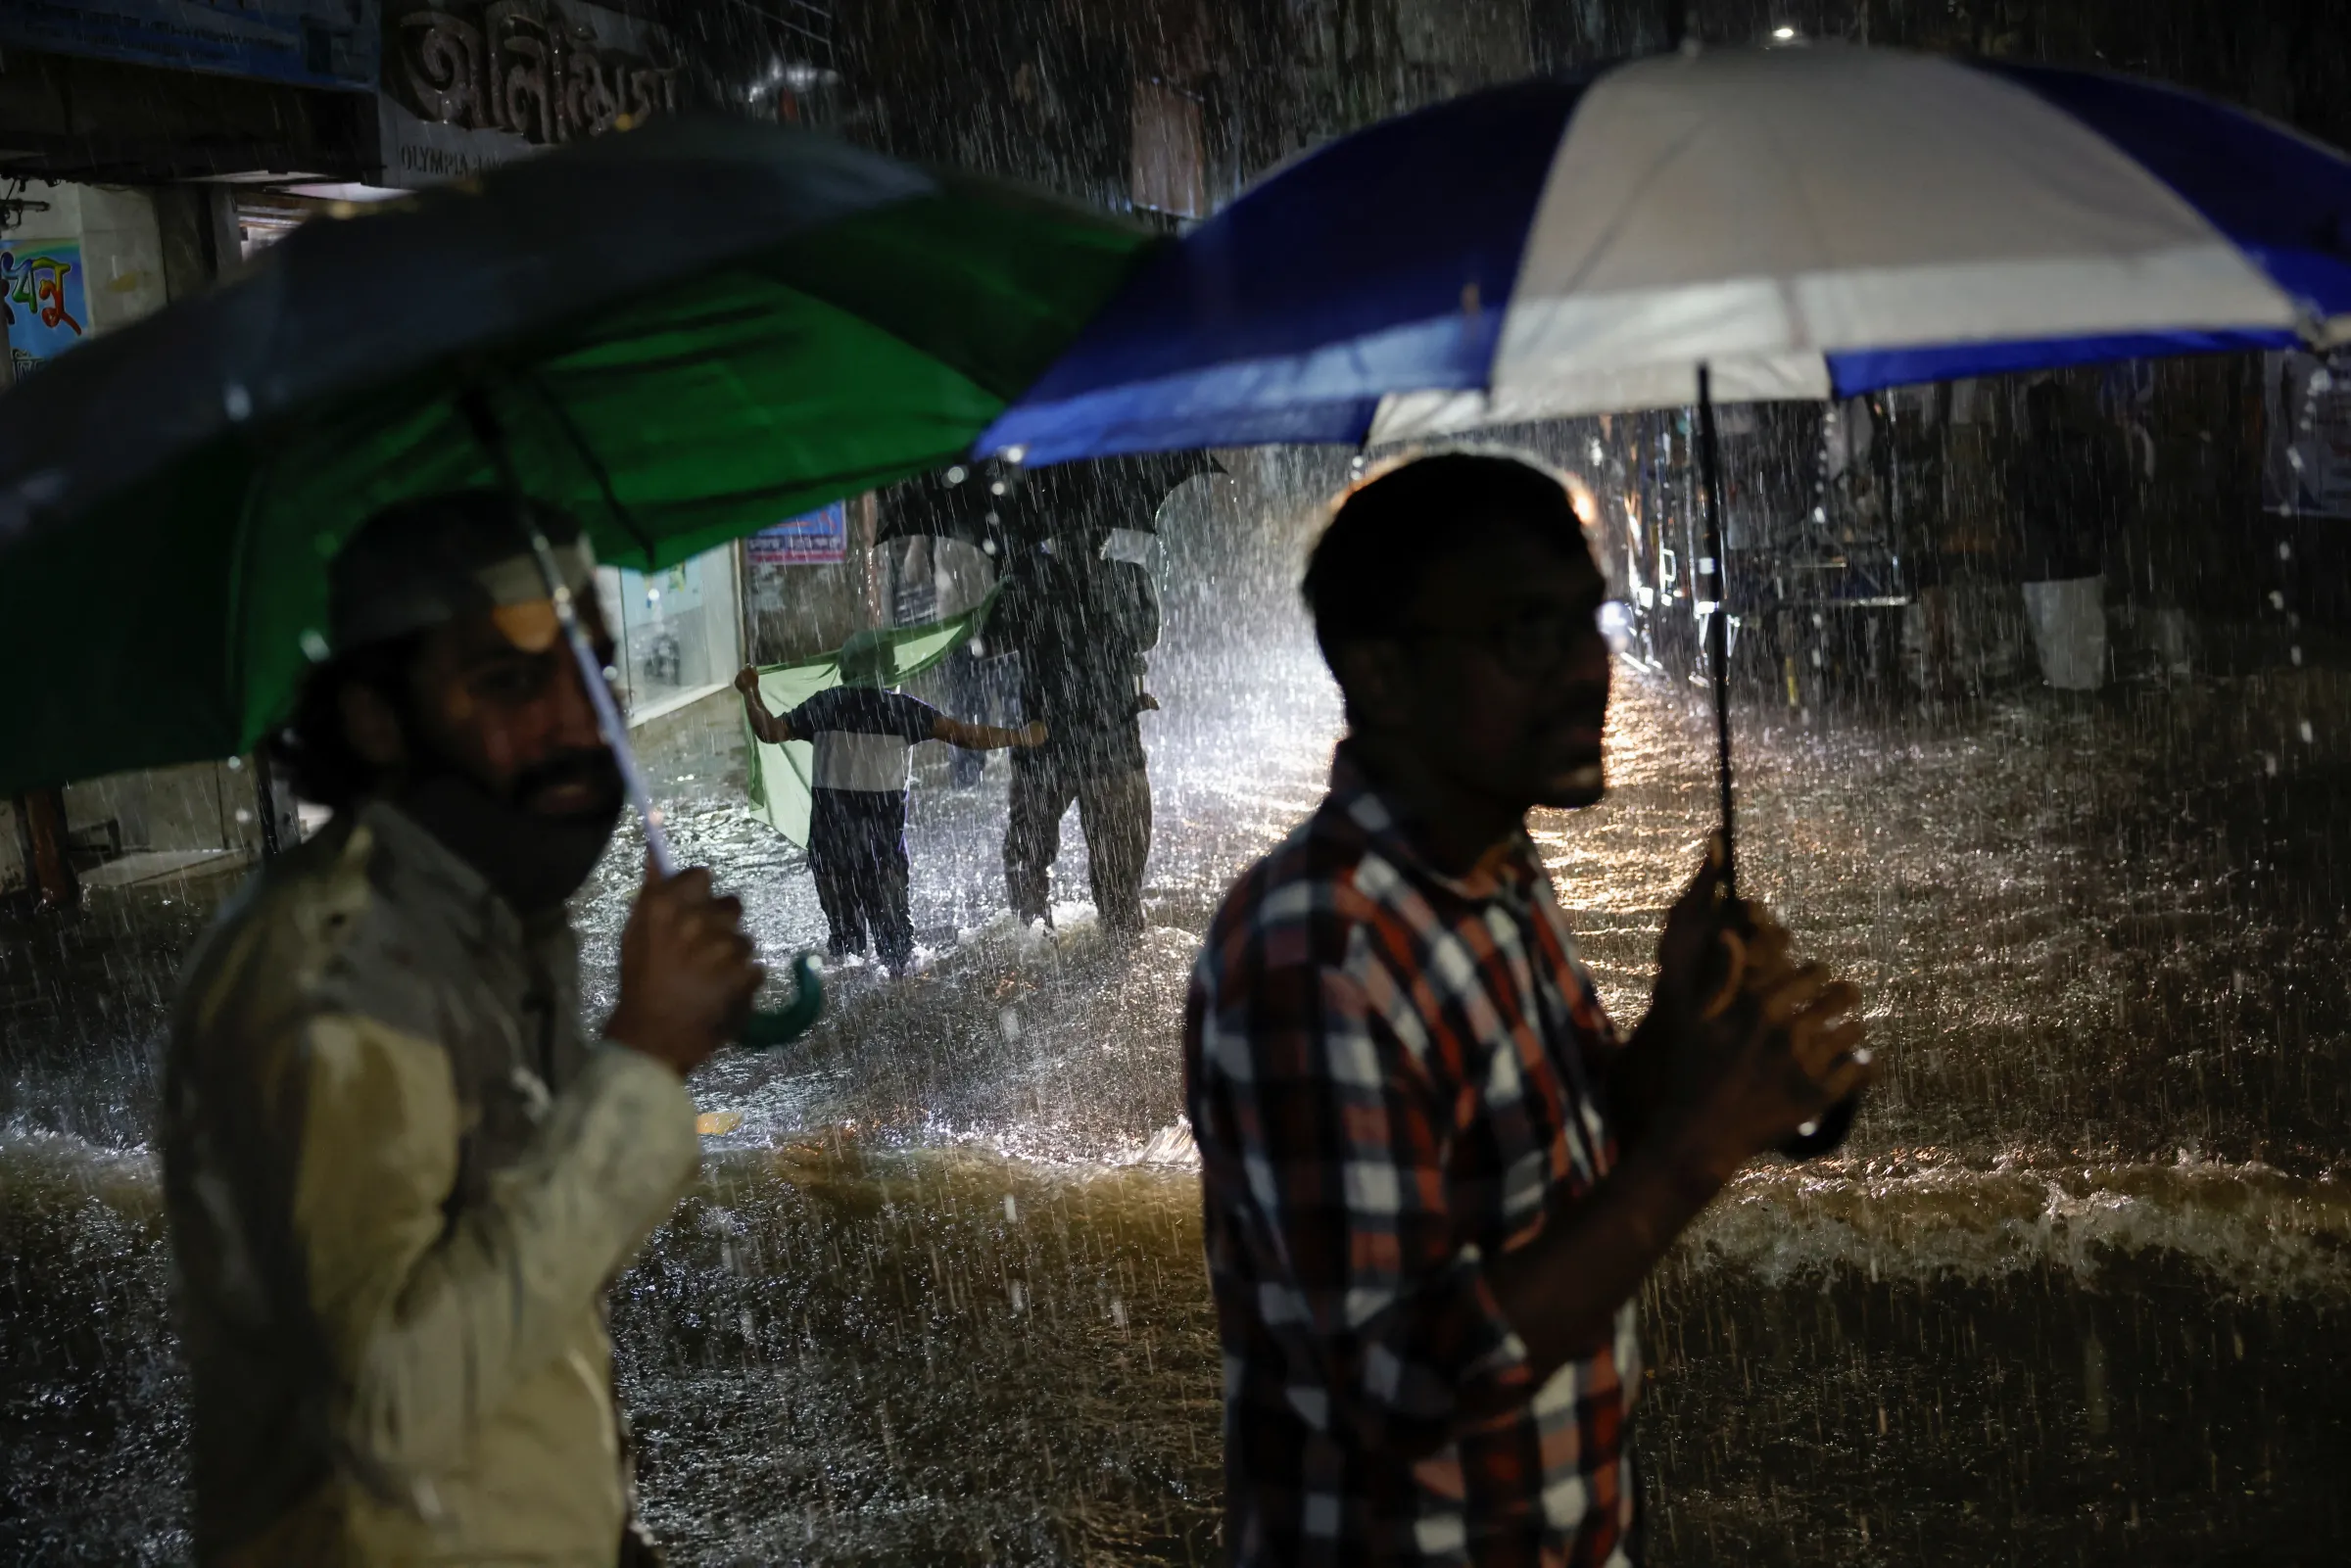 People wade through a flooded street amid continuous rain before the Cyclone Sitrang hits the country in Dhaka, Bangladesh, October 24, 2022. REUTERS/Mohammad Ponir Hossain